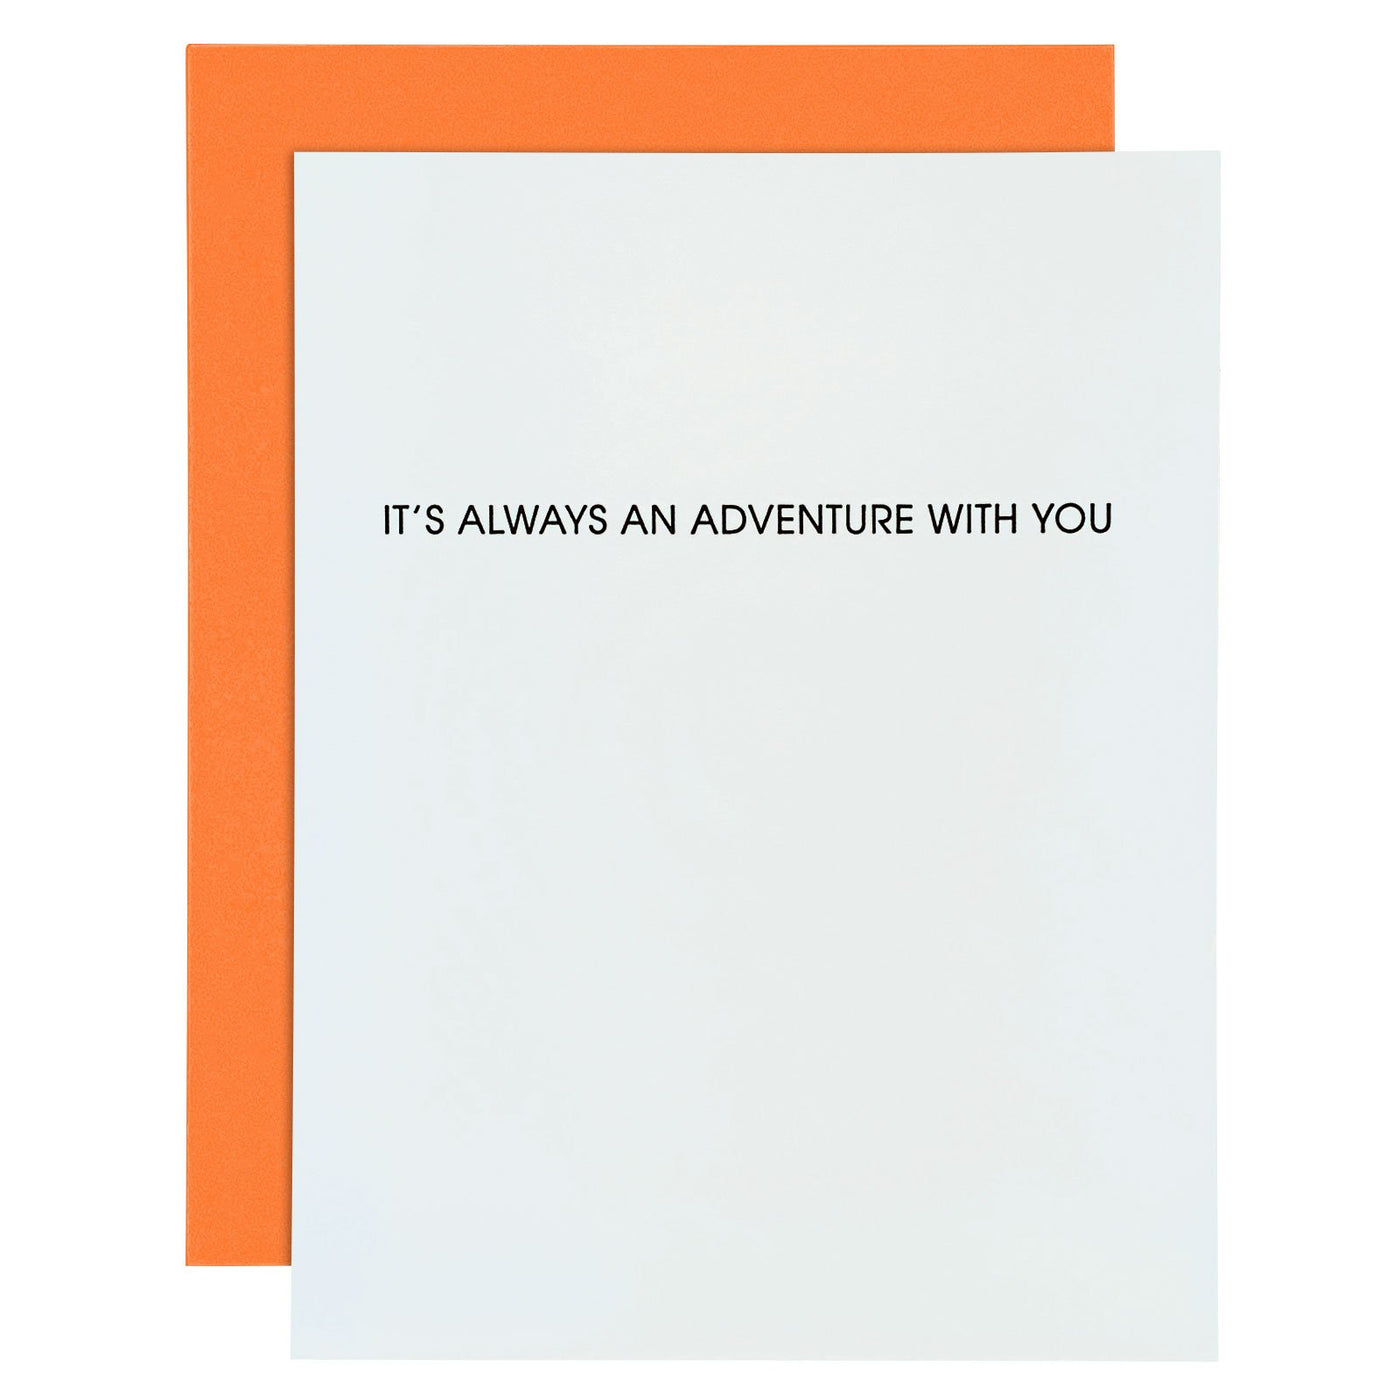 CARD LETTERPRESS "ALWAYS AN ADVENTURE WITH YOU"